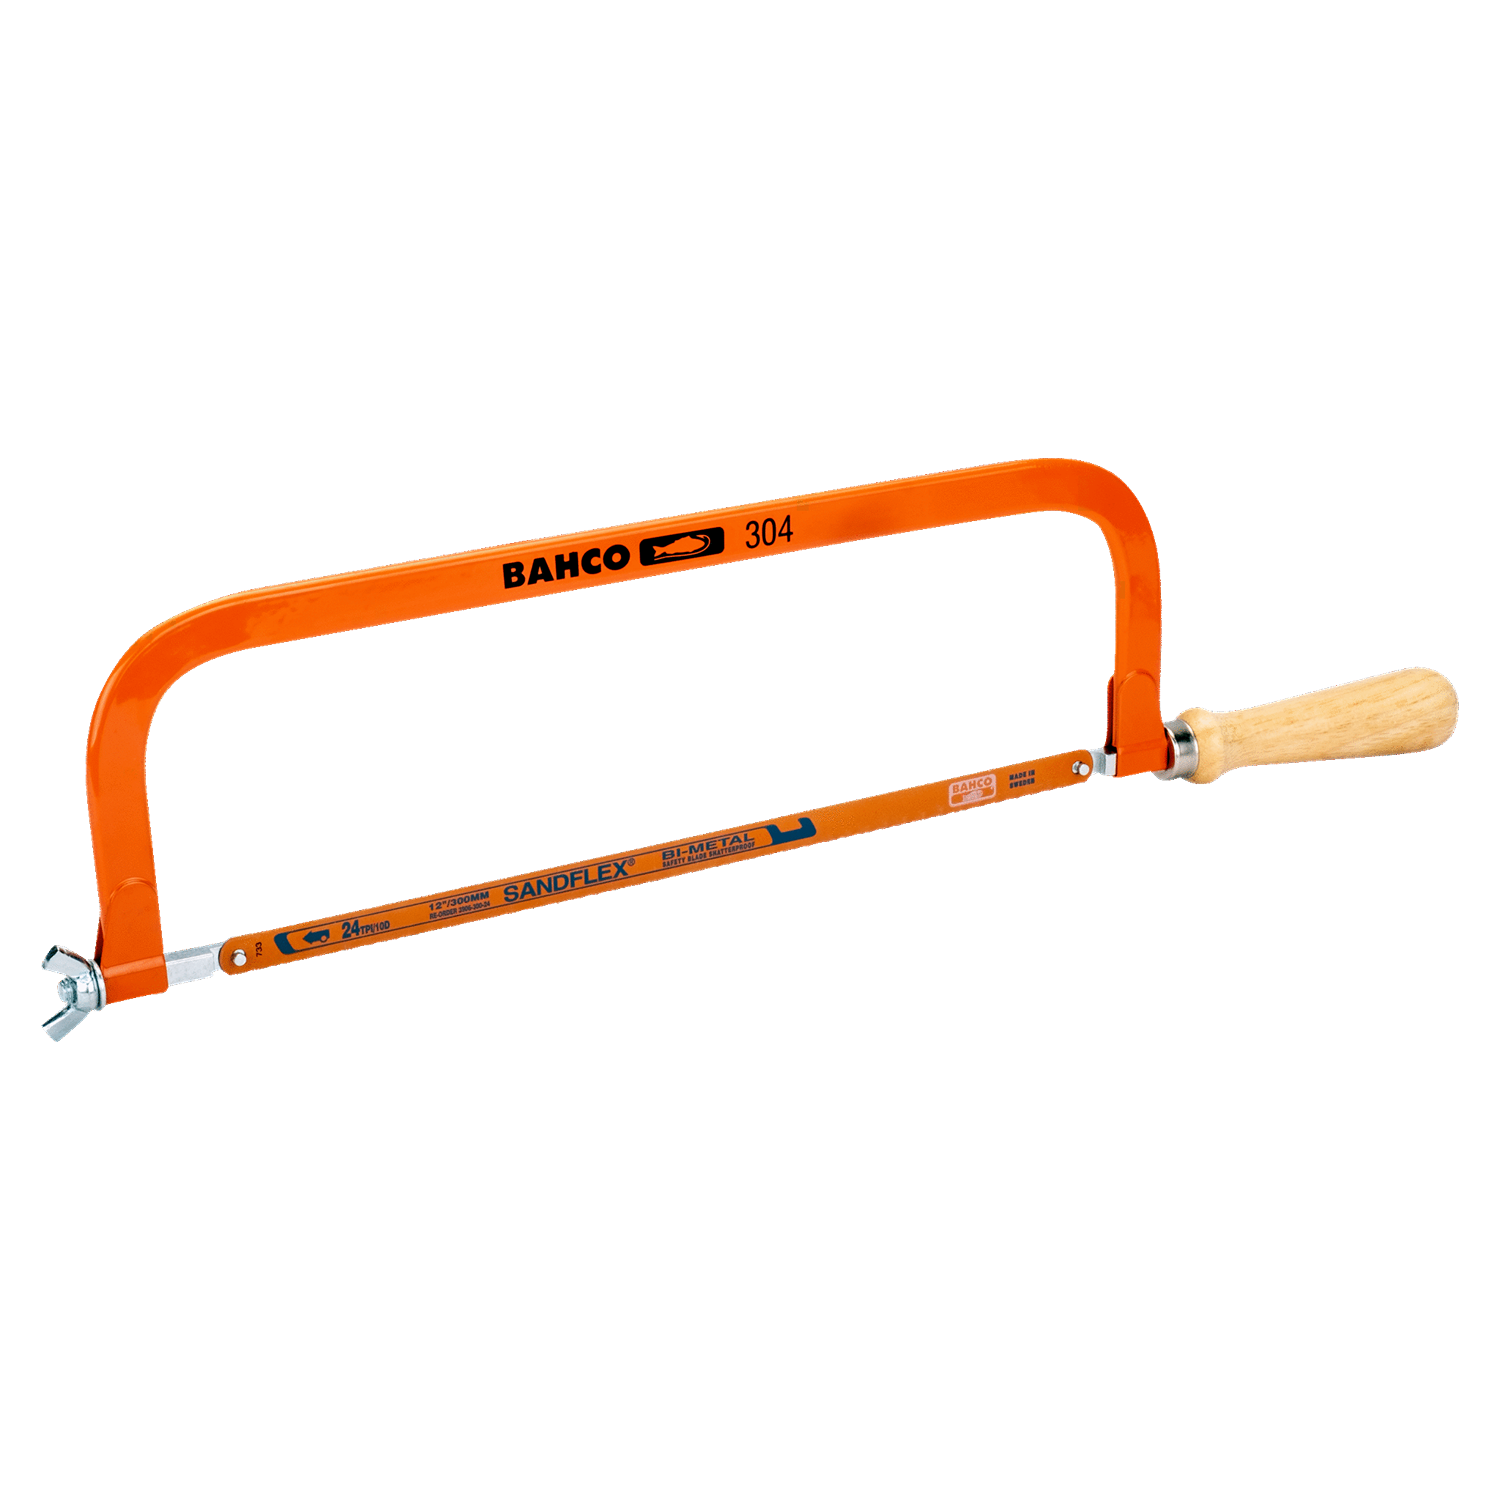 BAHCO 304 Traditional Hand Hacksaw Frame 517 mm (BAHCO Tools) - Premium Hand Hacksaw Frame from BAHCO - Shop now at Yew Aik.